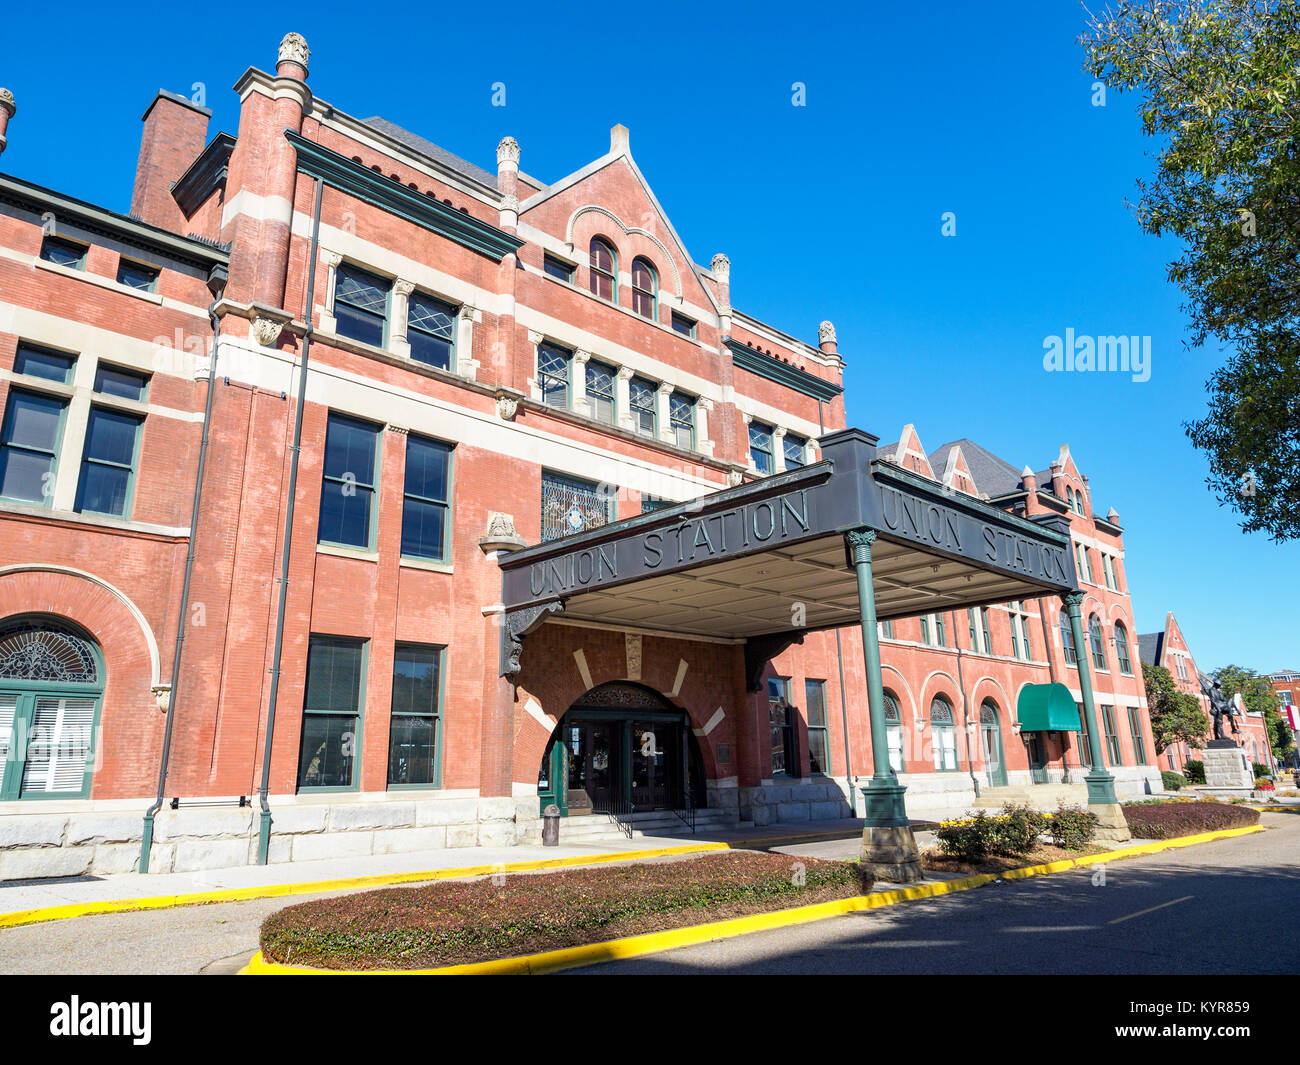 Montgomery Union Station, former train or railroad station, now a local tourist attraction and a National Historic Landmark in Montgomery Alabama US. Stock Photo